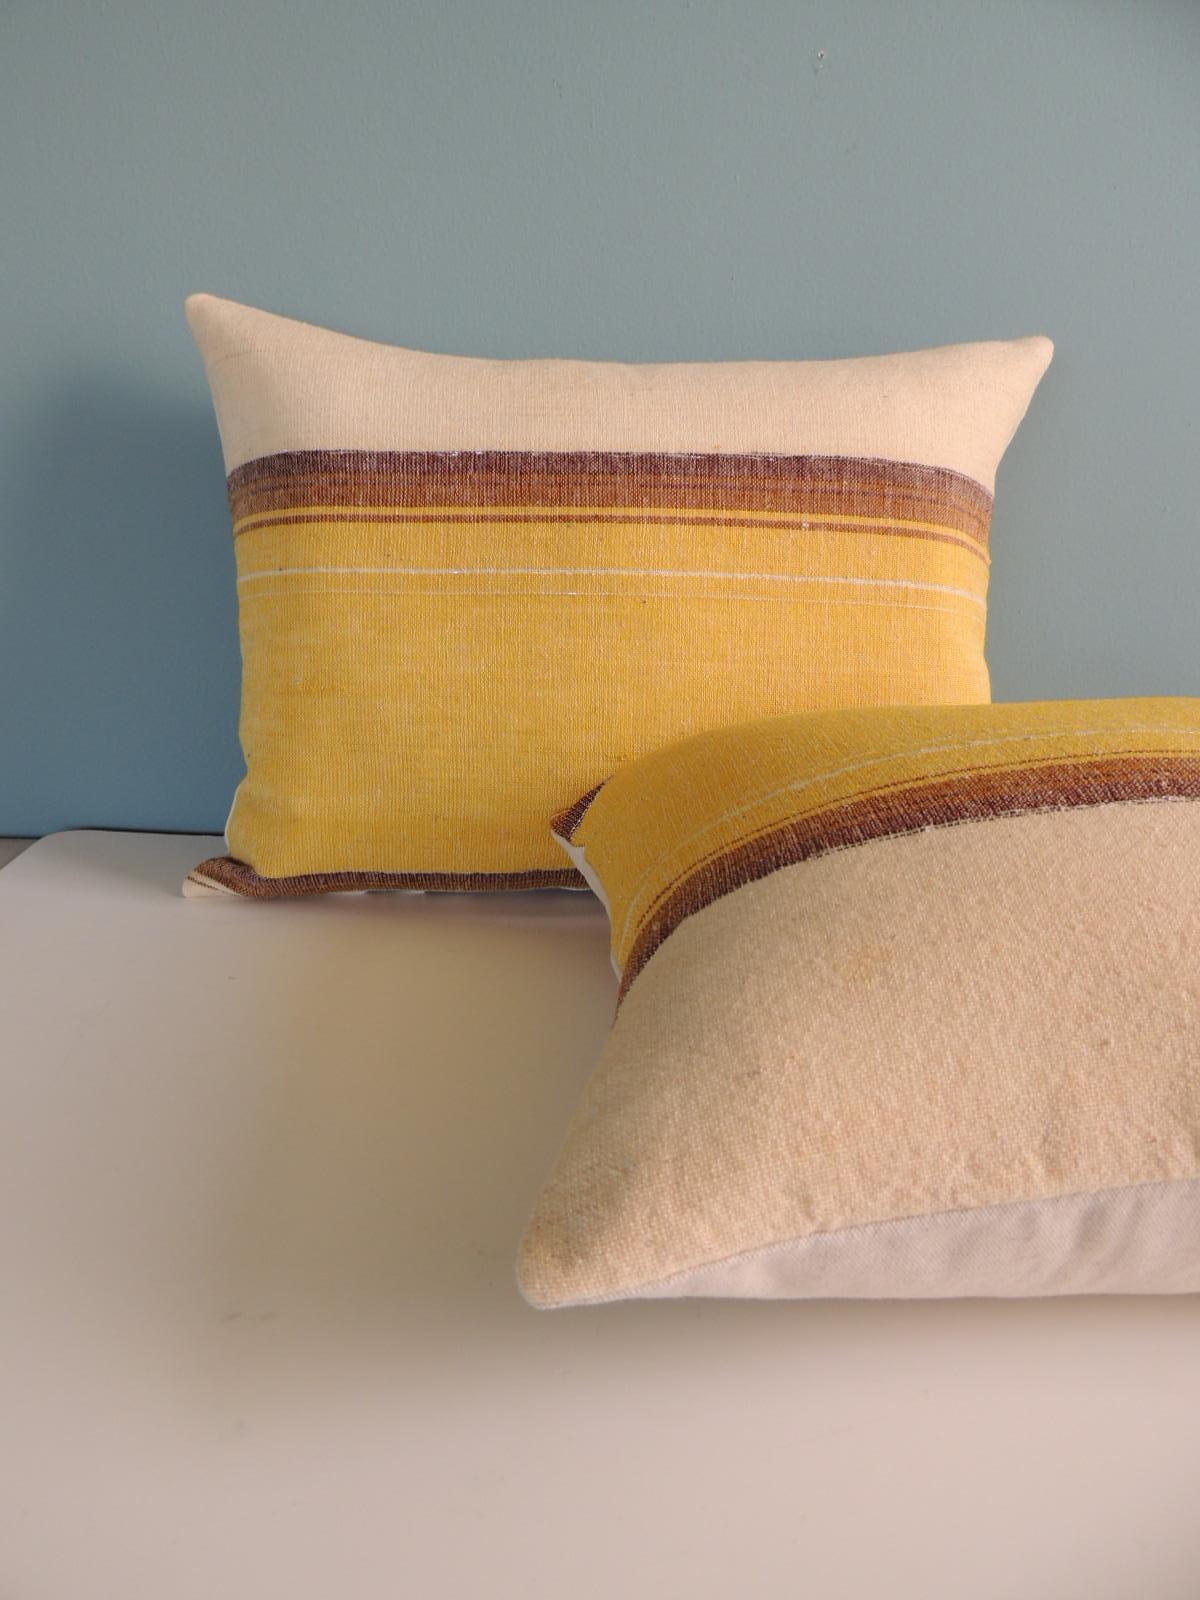 Mid-20th Century Vintage Woven Yellow and Brown Stripe Pattern Decorative Bolster Pillows